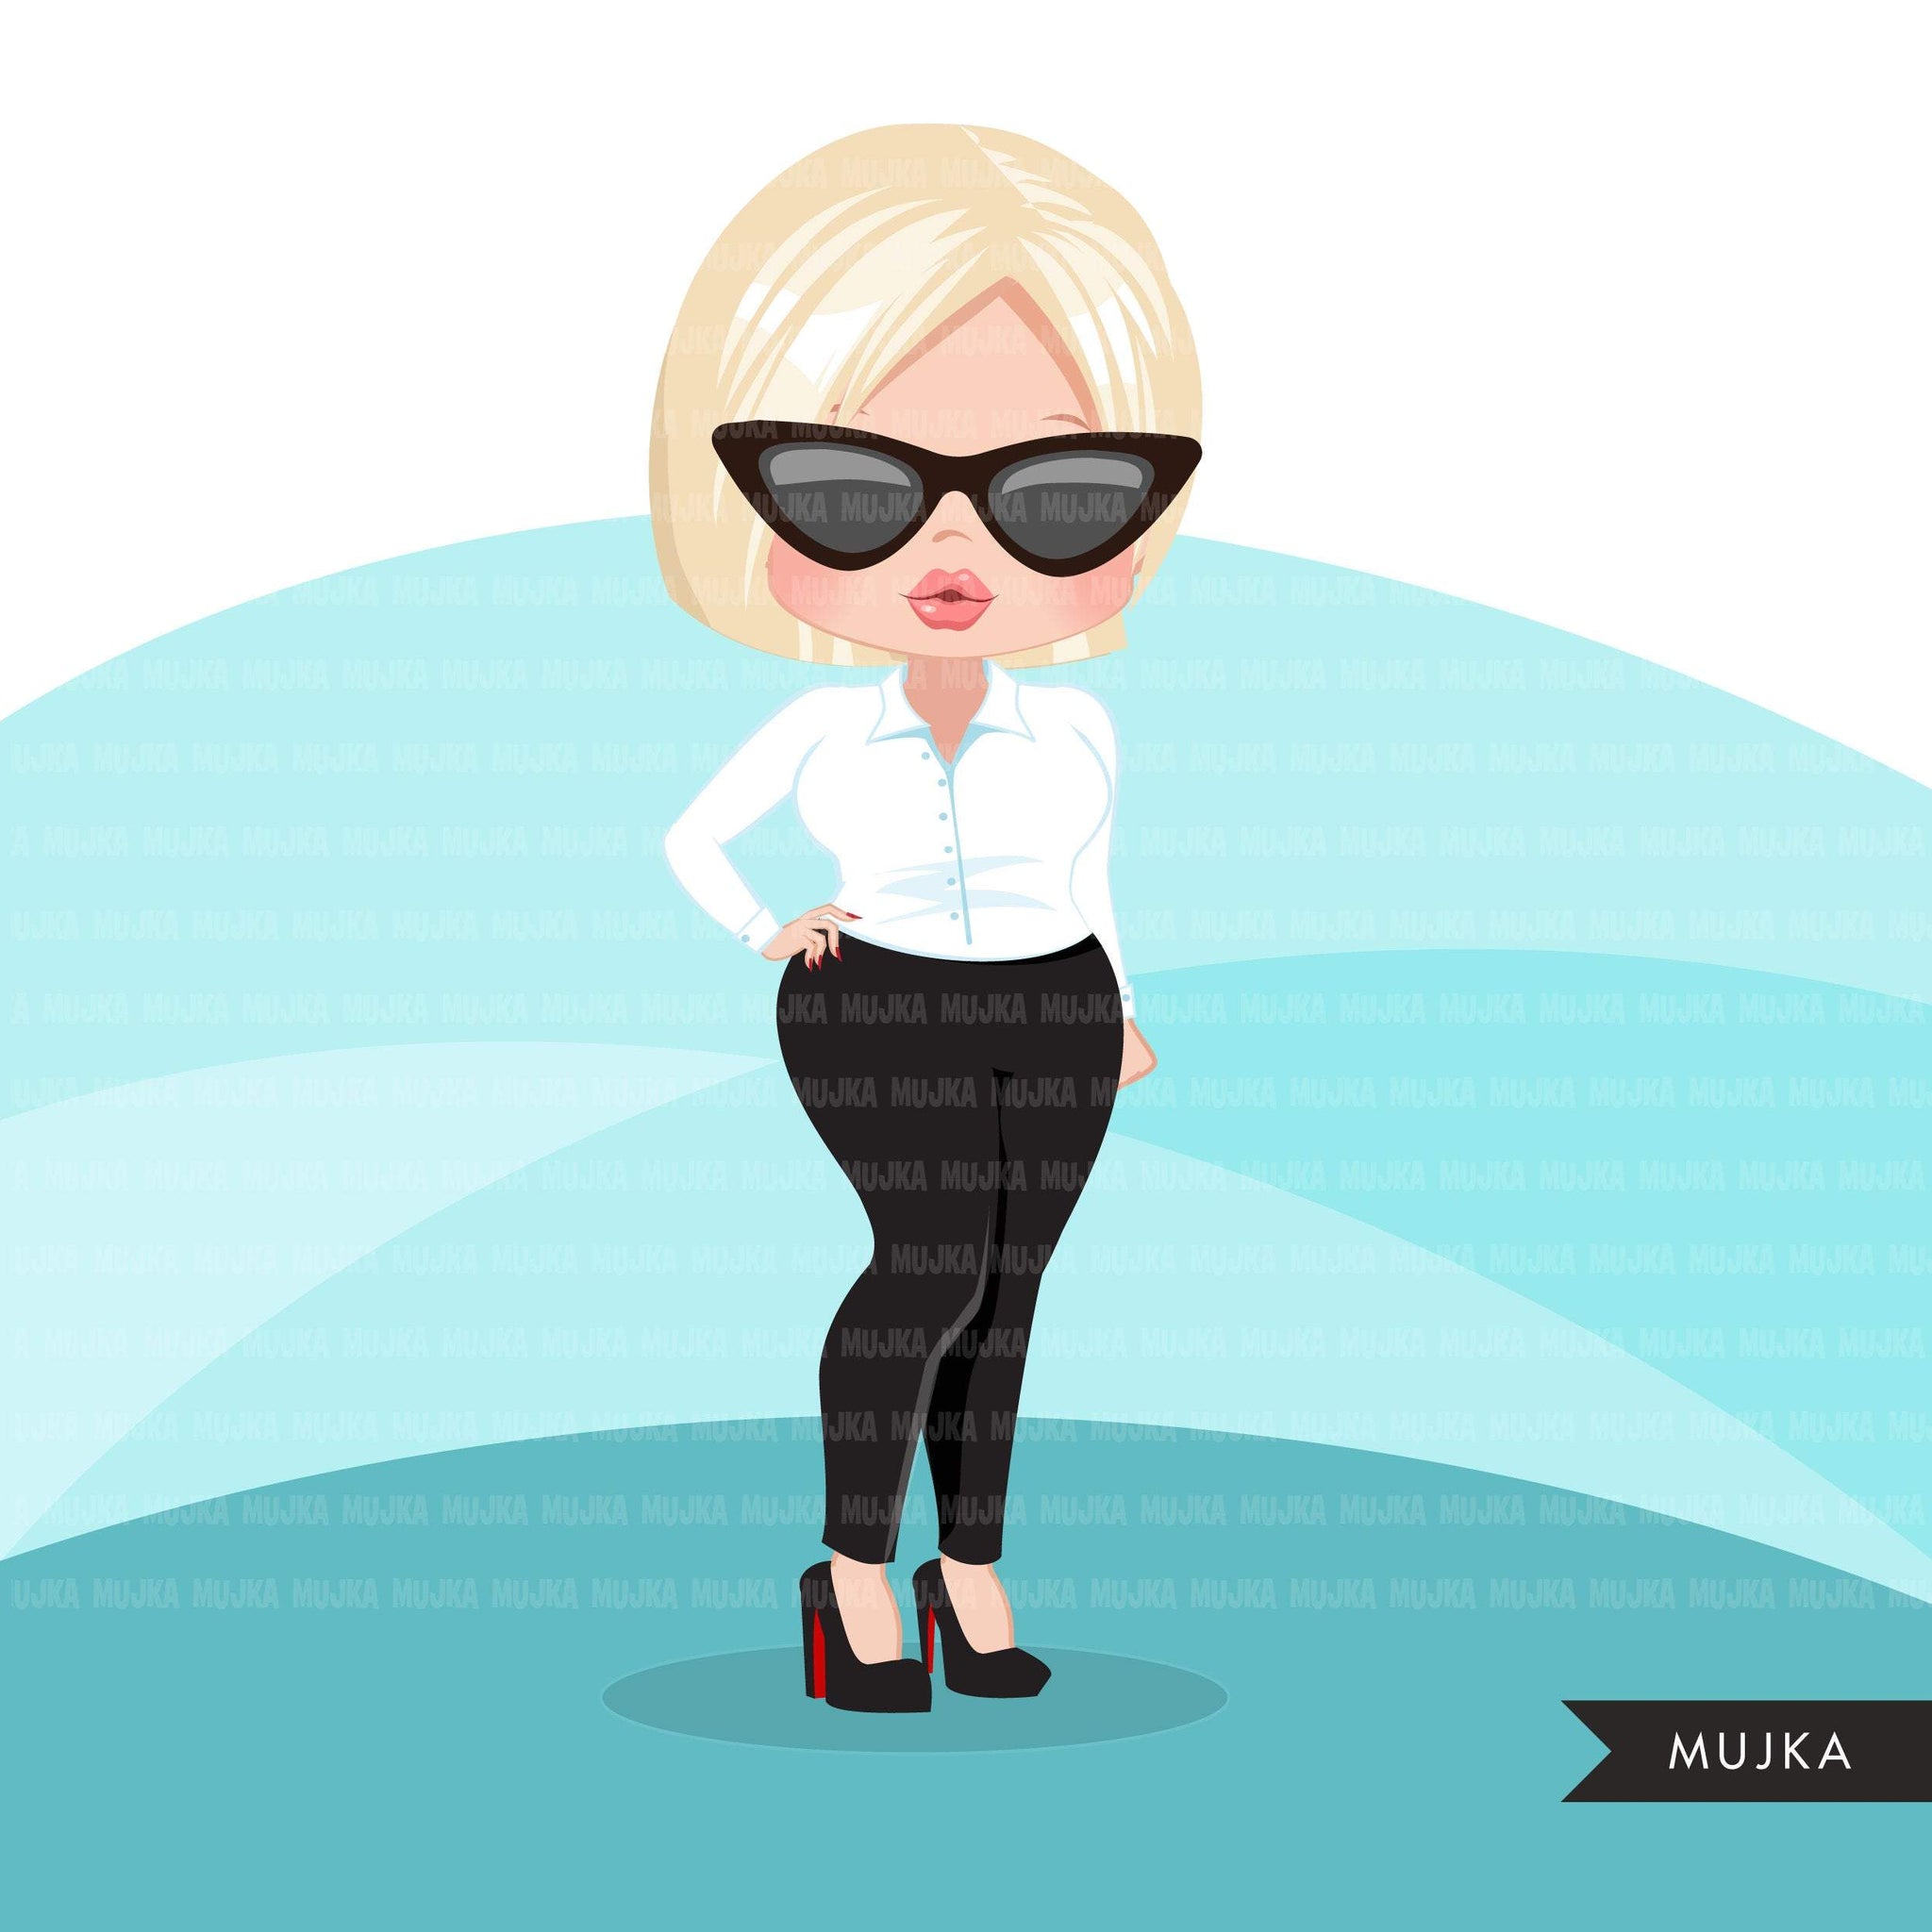 Blonde woman clipart with business suit, briefcase and glasses, girl boss